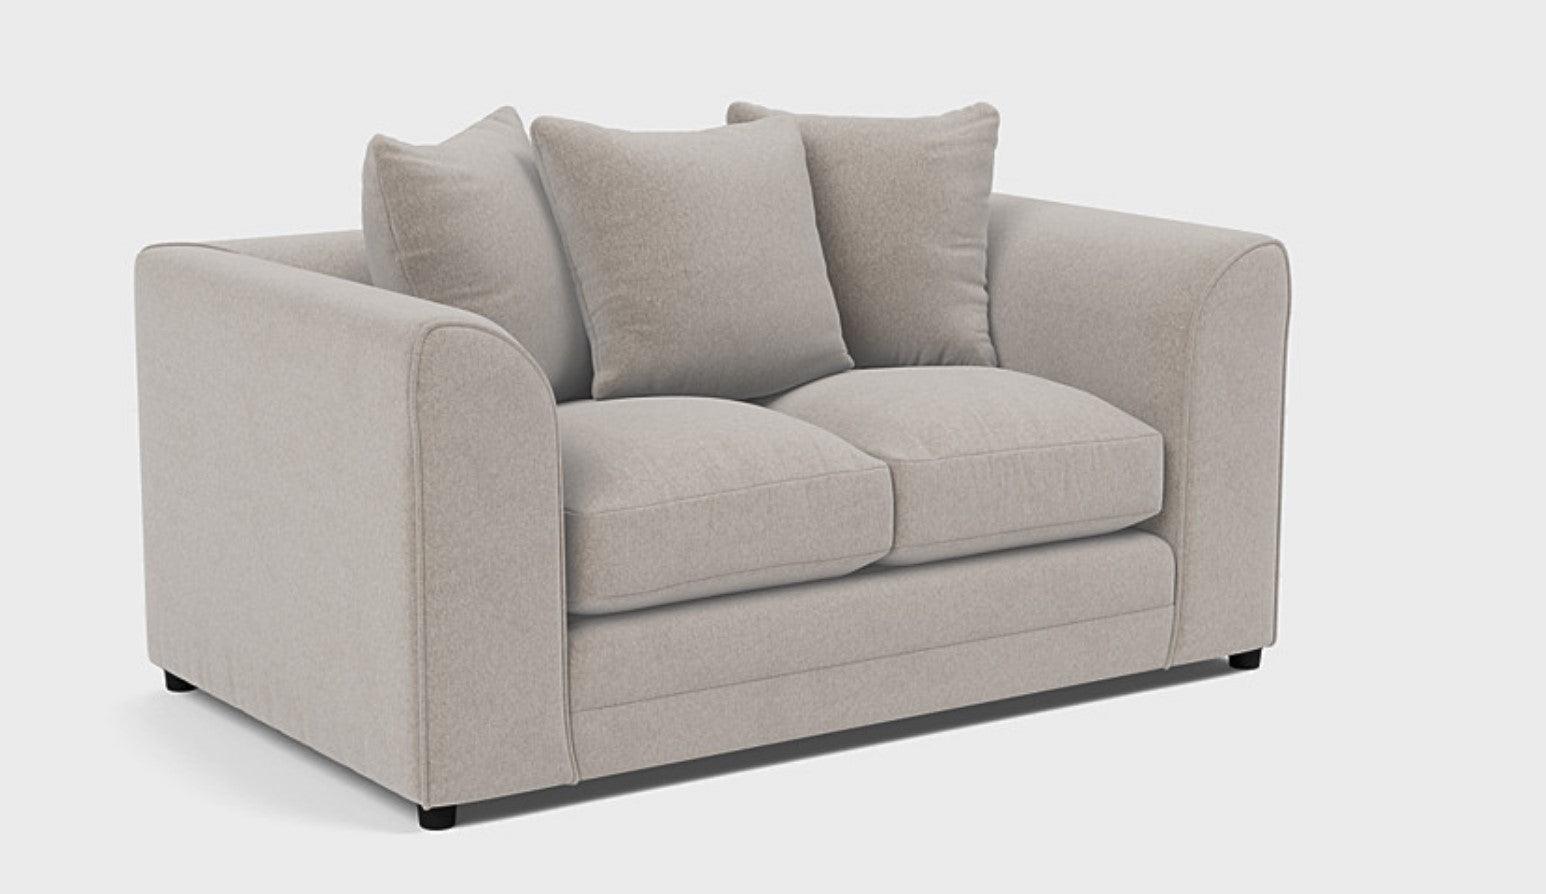 Chelsea Fabric Sofa Collection - loveyourbed.co.uk